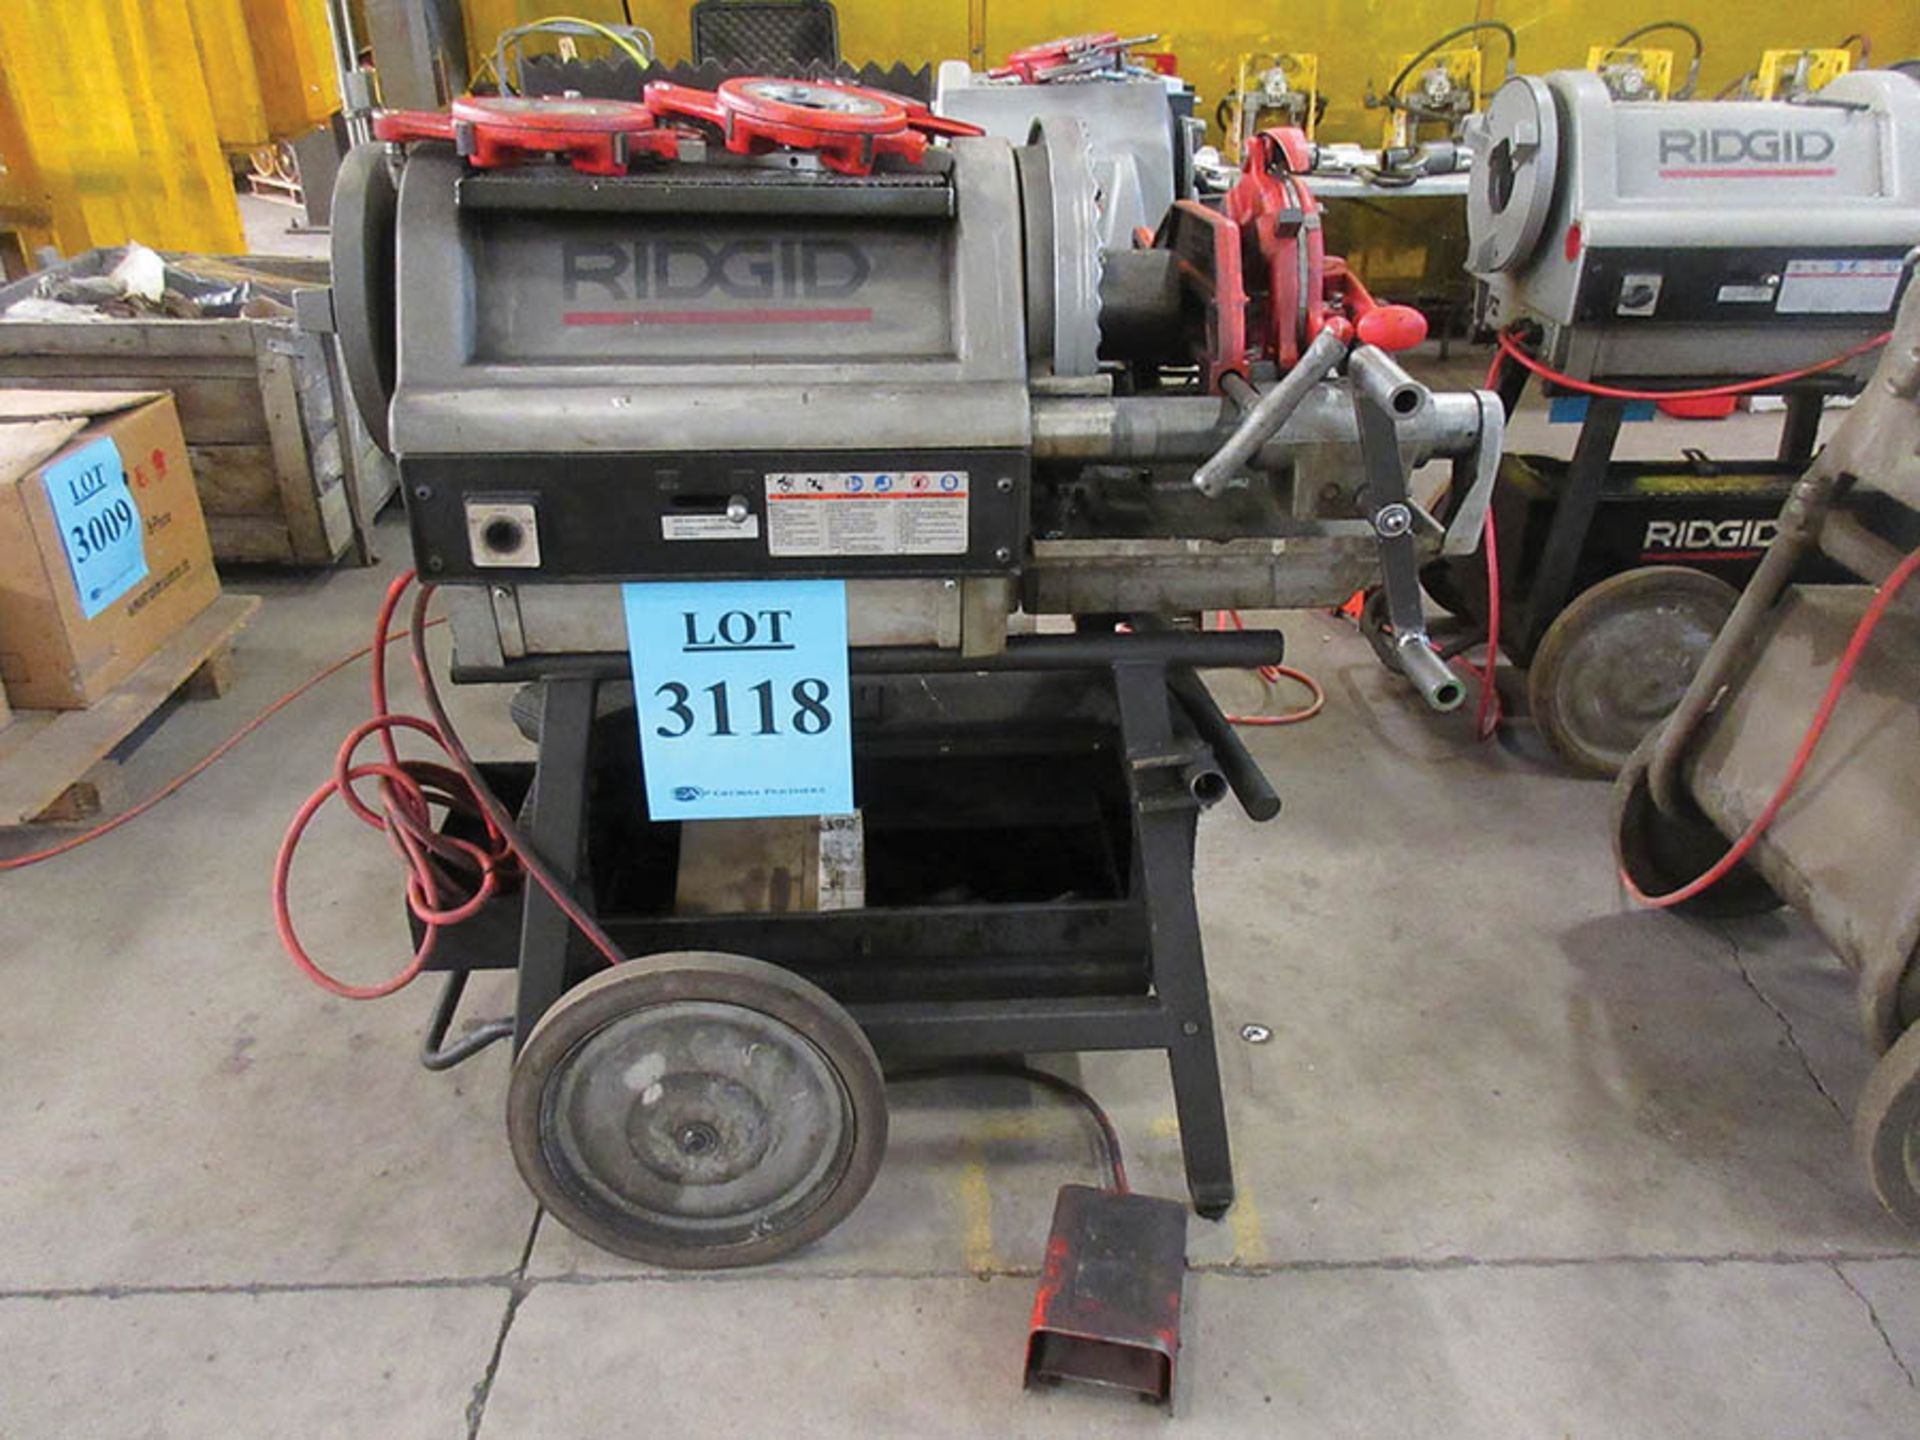 RIDGID 1224 PIPE THREADING MACHINE WITH STAND, PLUS (QTY.2) 1/8'' - 2'' DIE HEADS, AND (QTY.1) 2 1/2